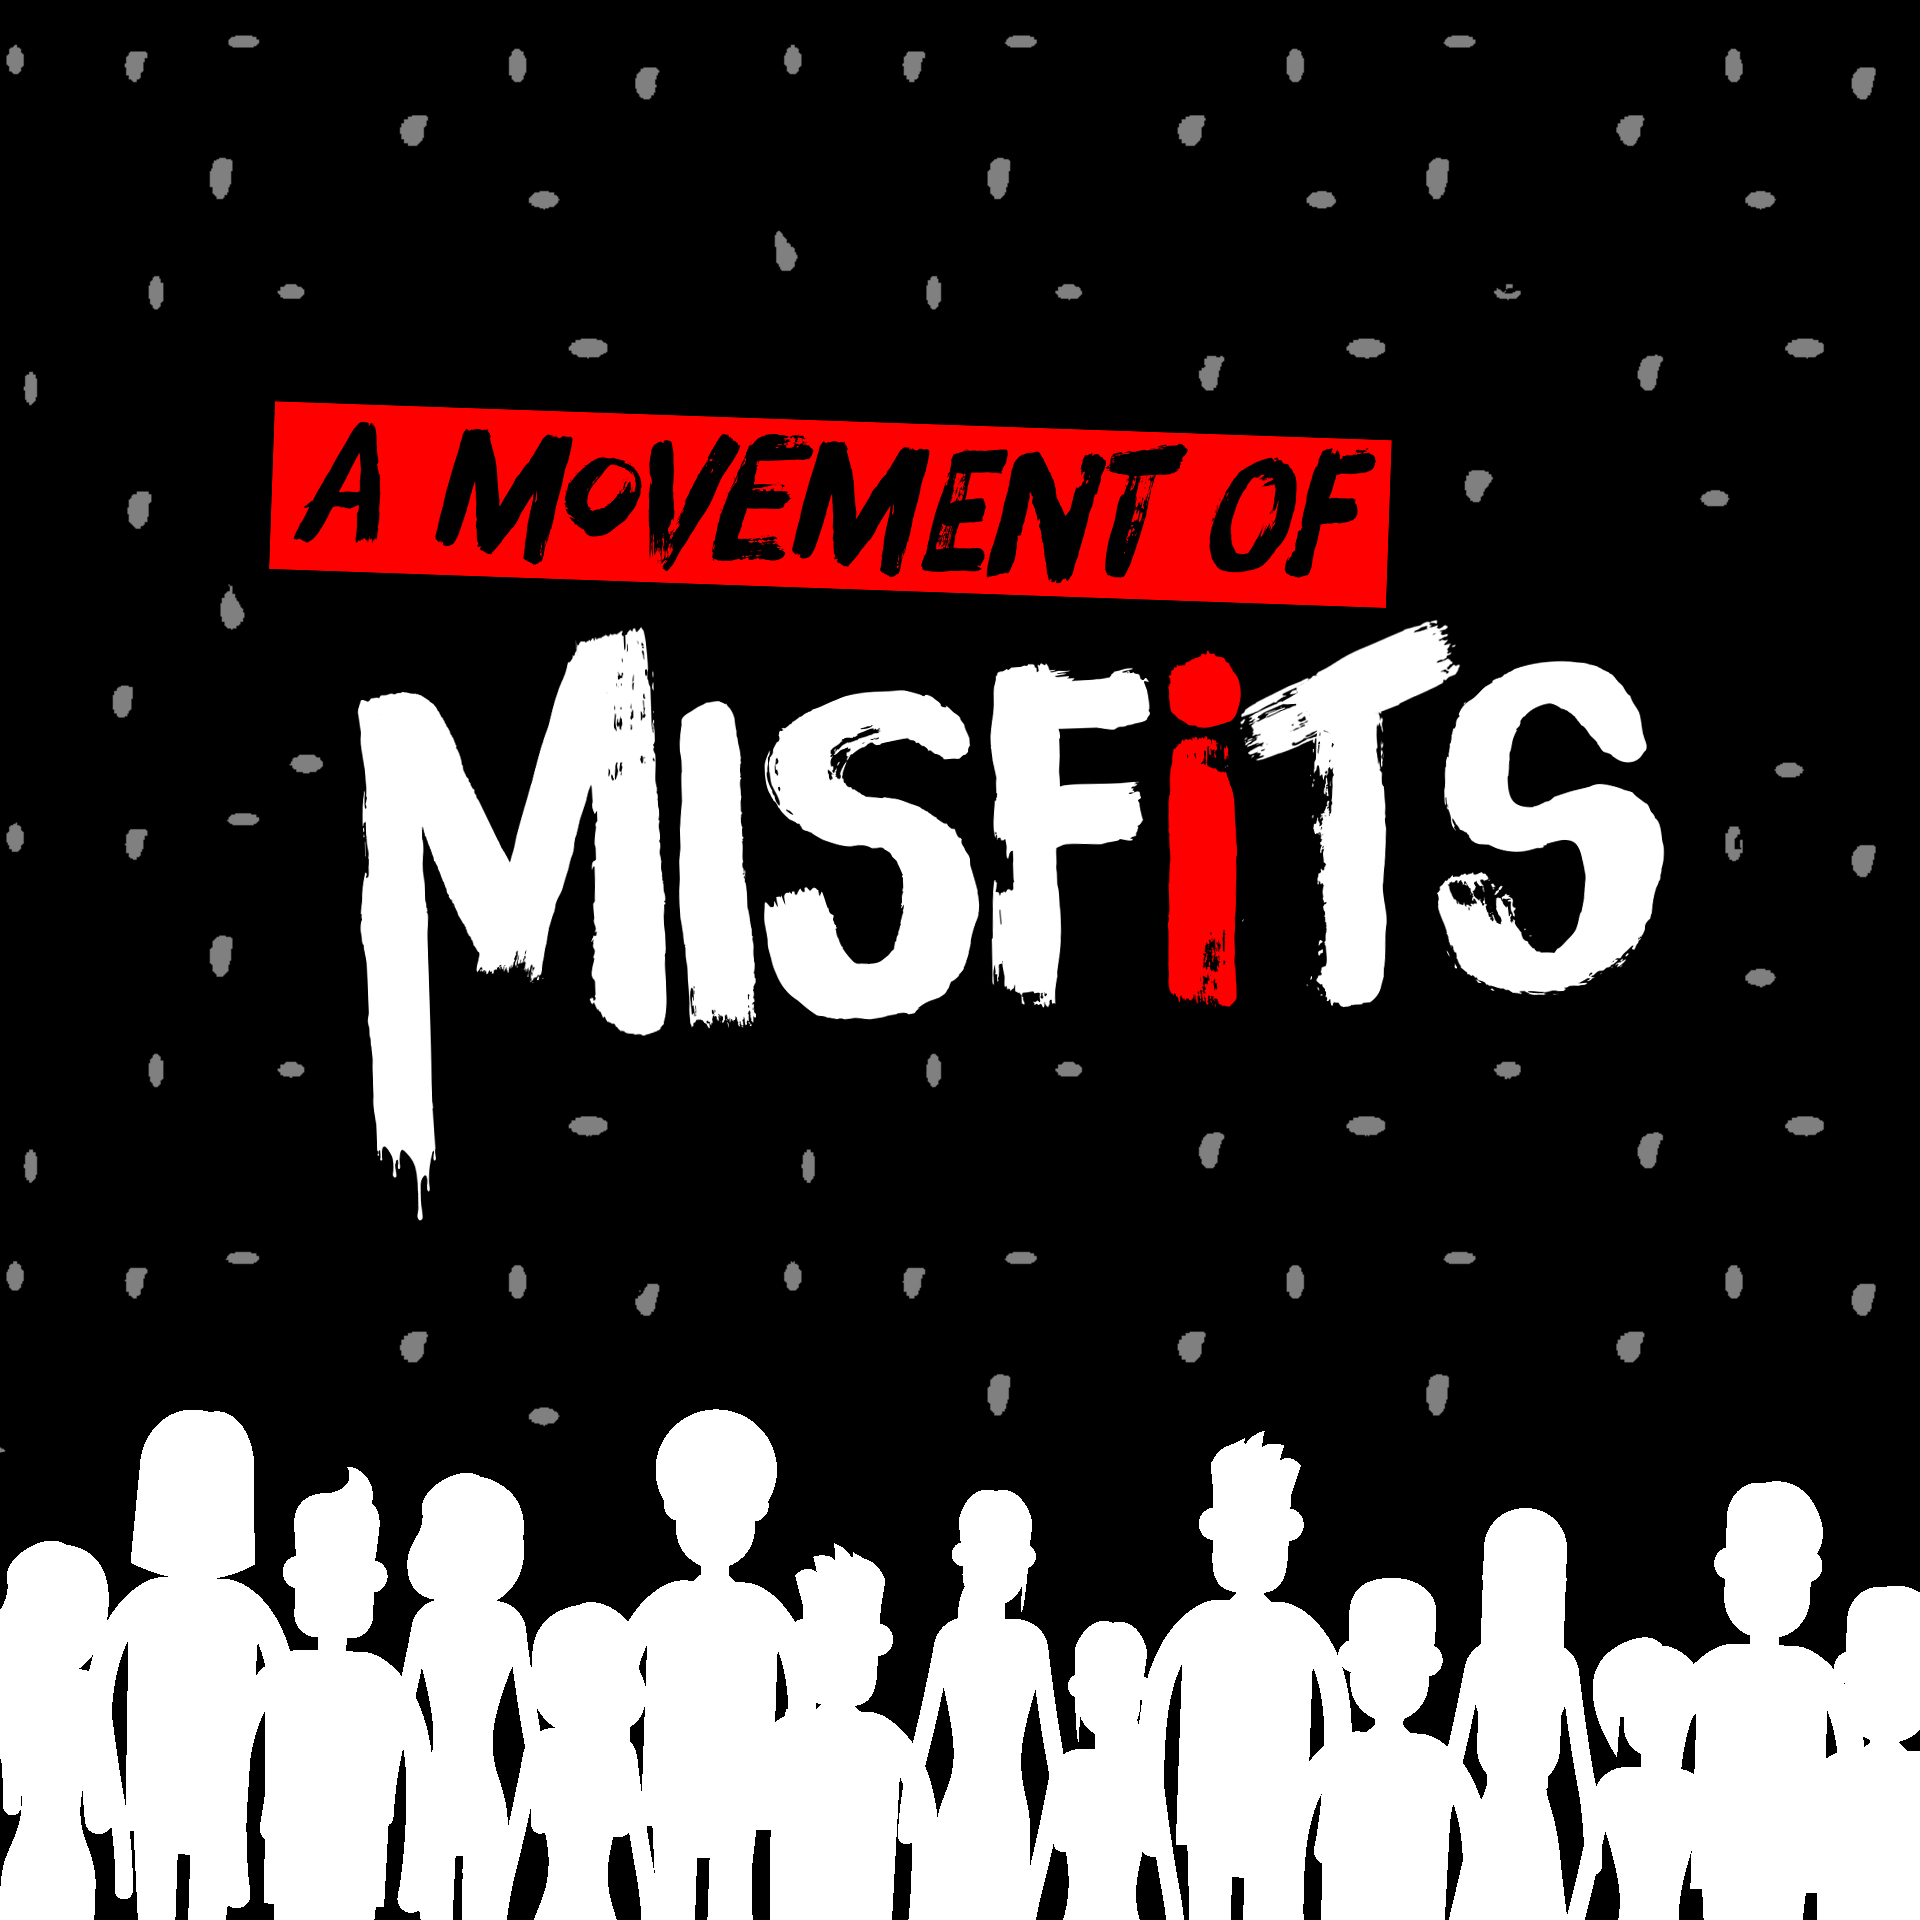 A Movement of Misfits #7: Acts 10